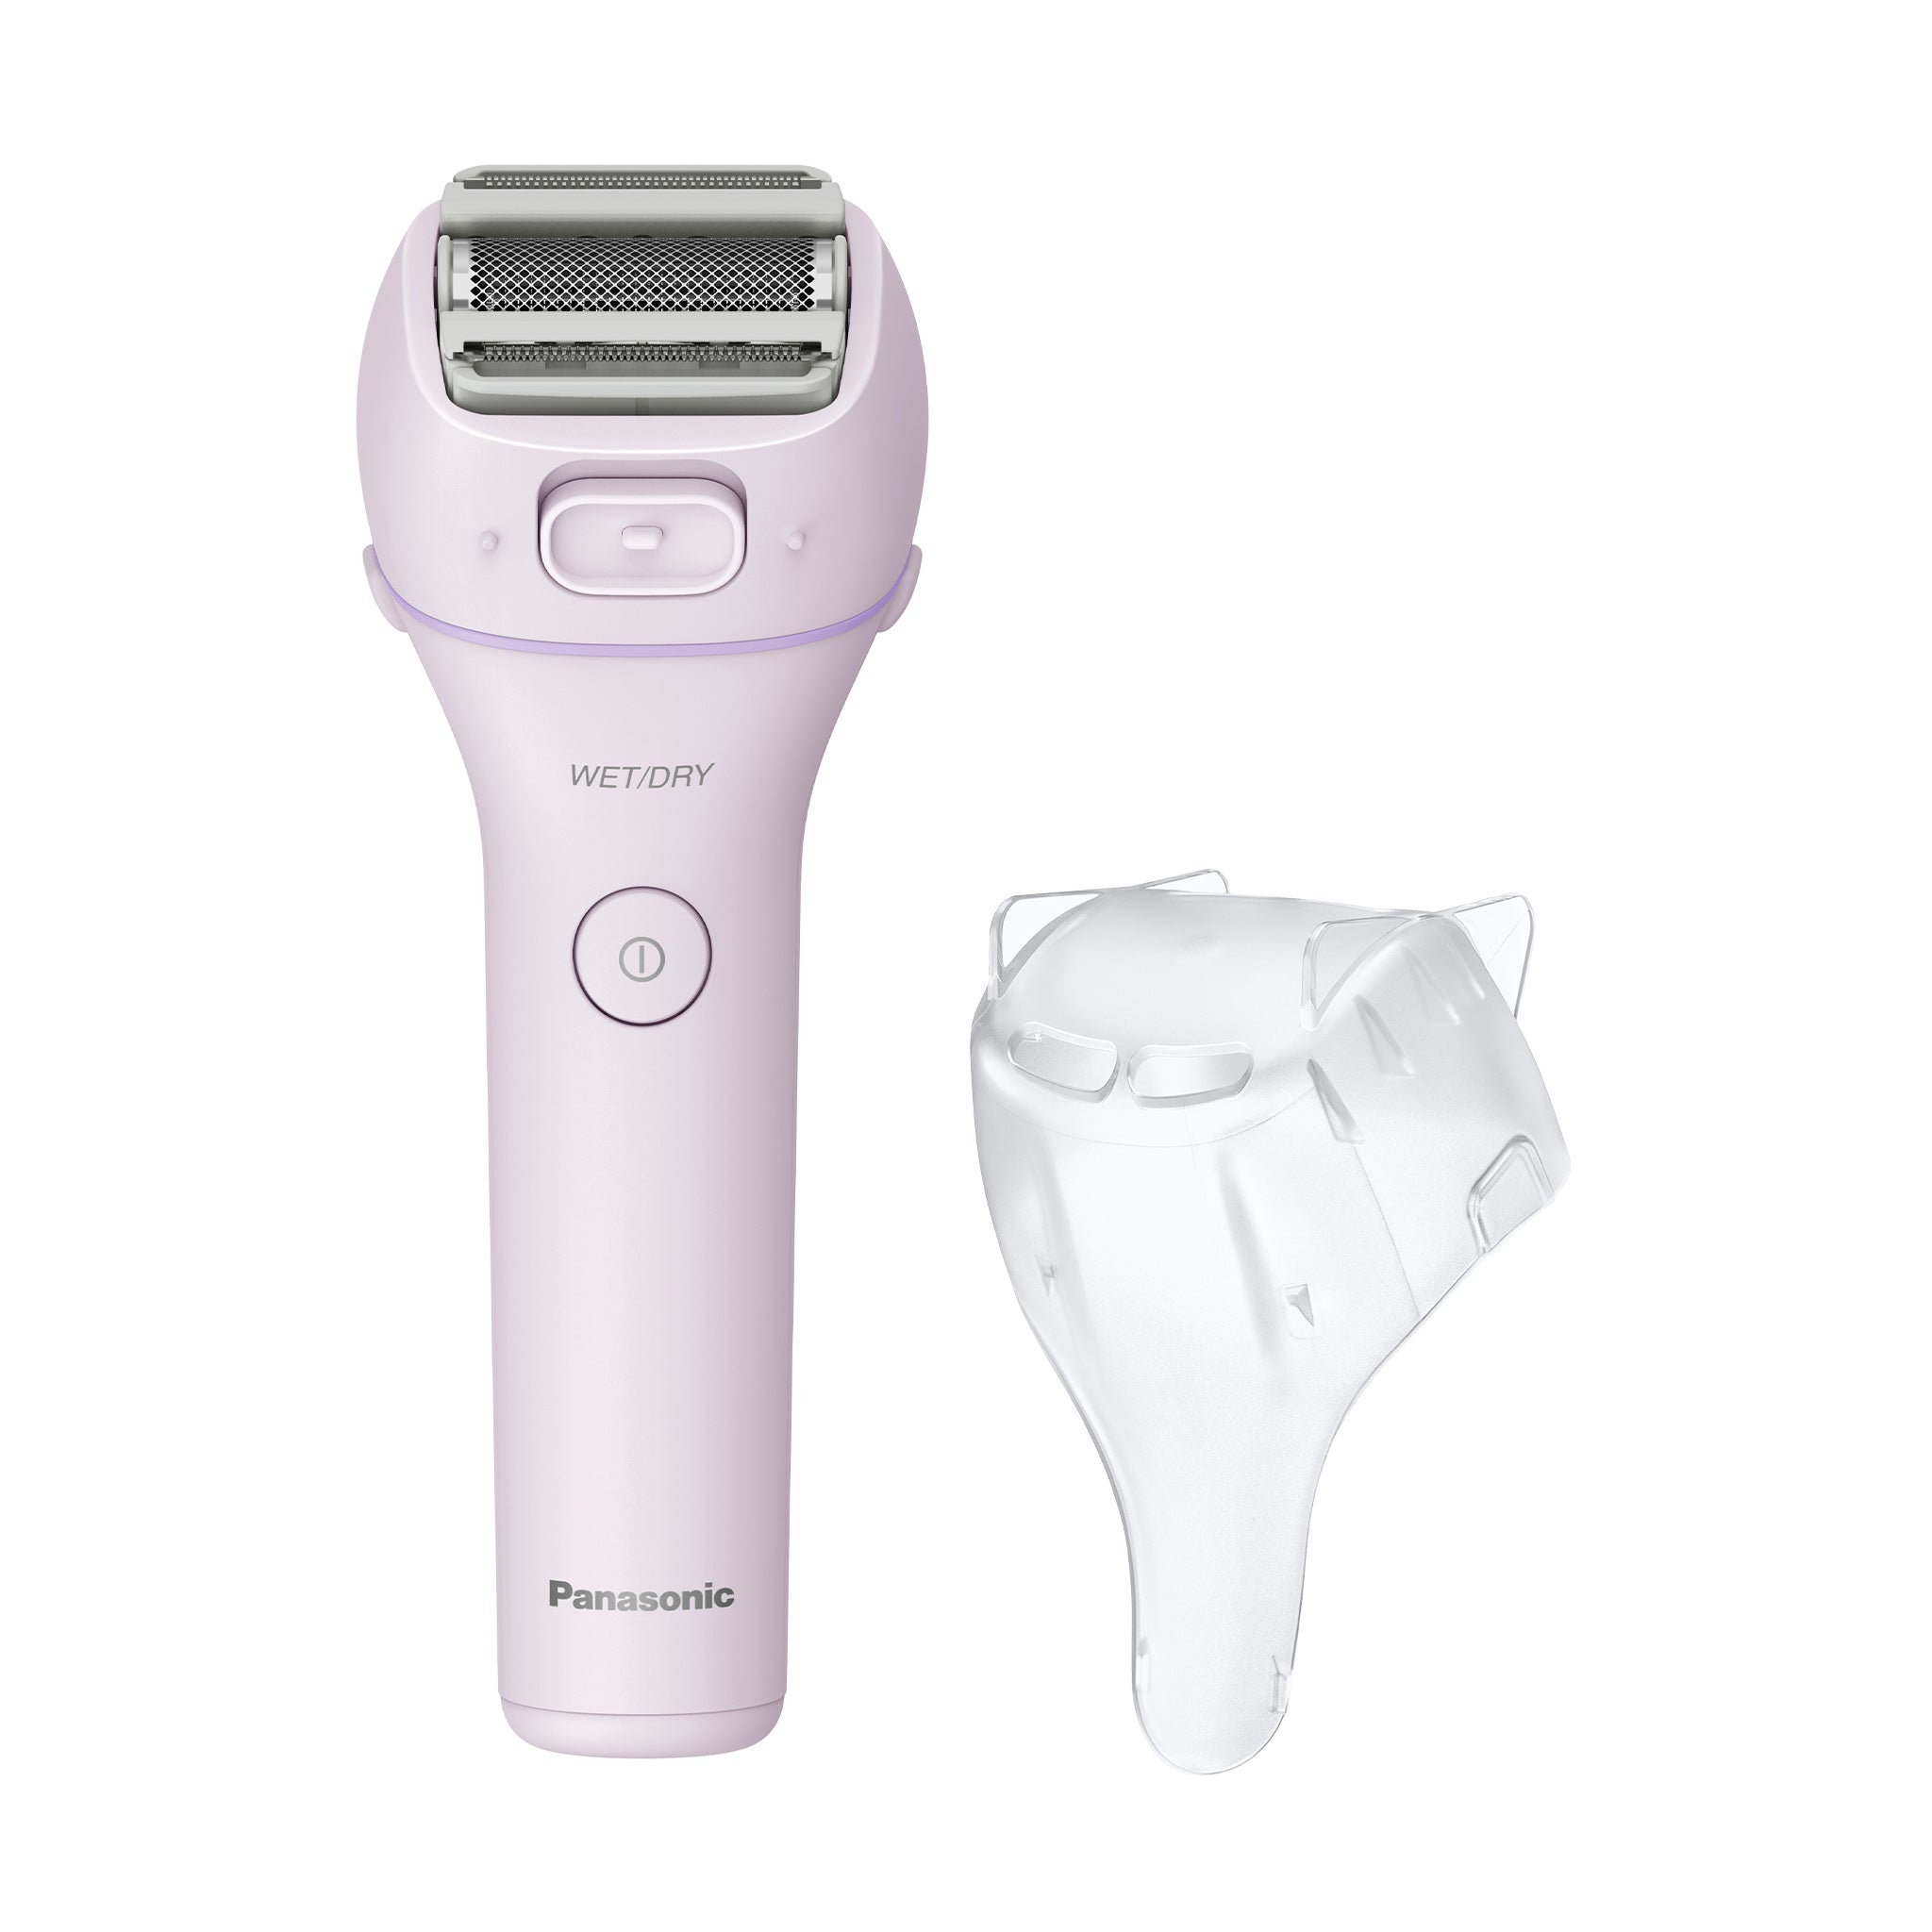 Panasonic 3-Blade Women's Electric Shaver with Pop-Up Trimmer - ES 